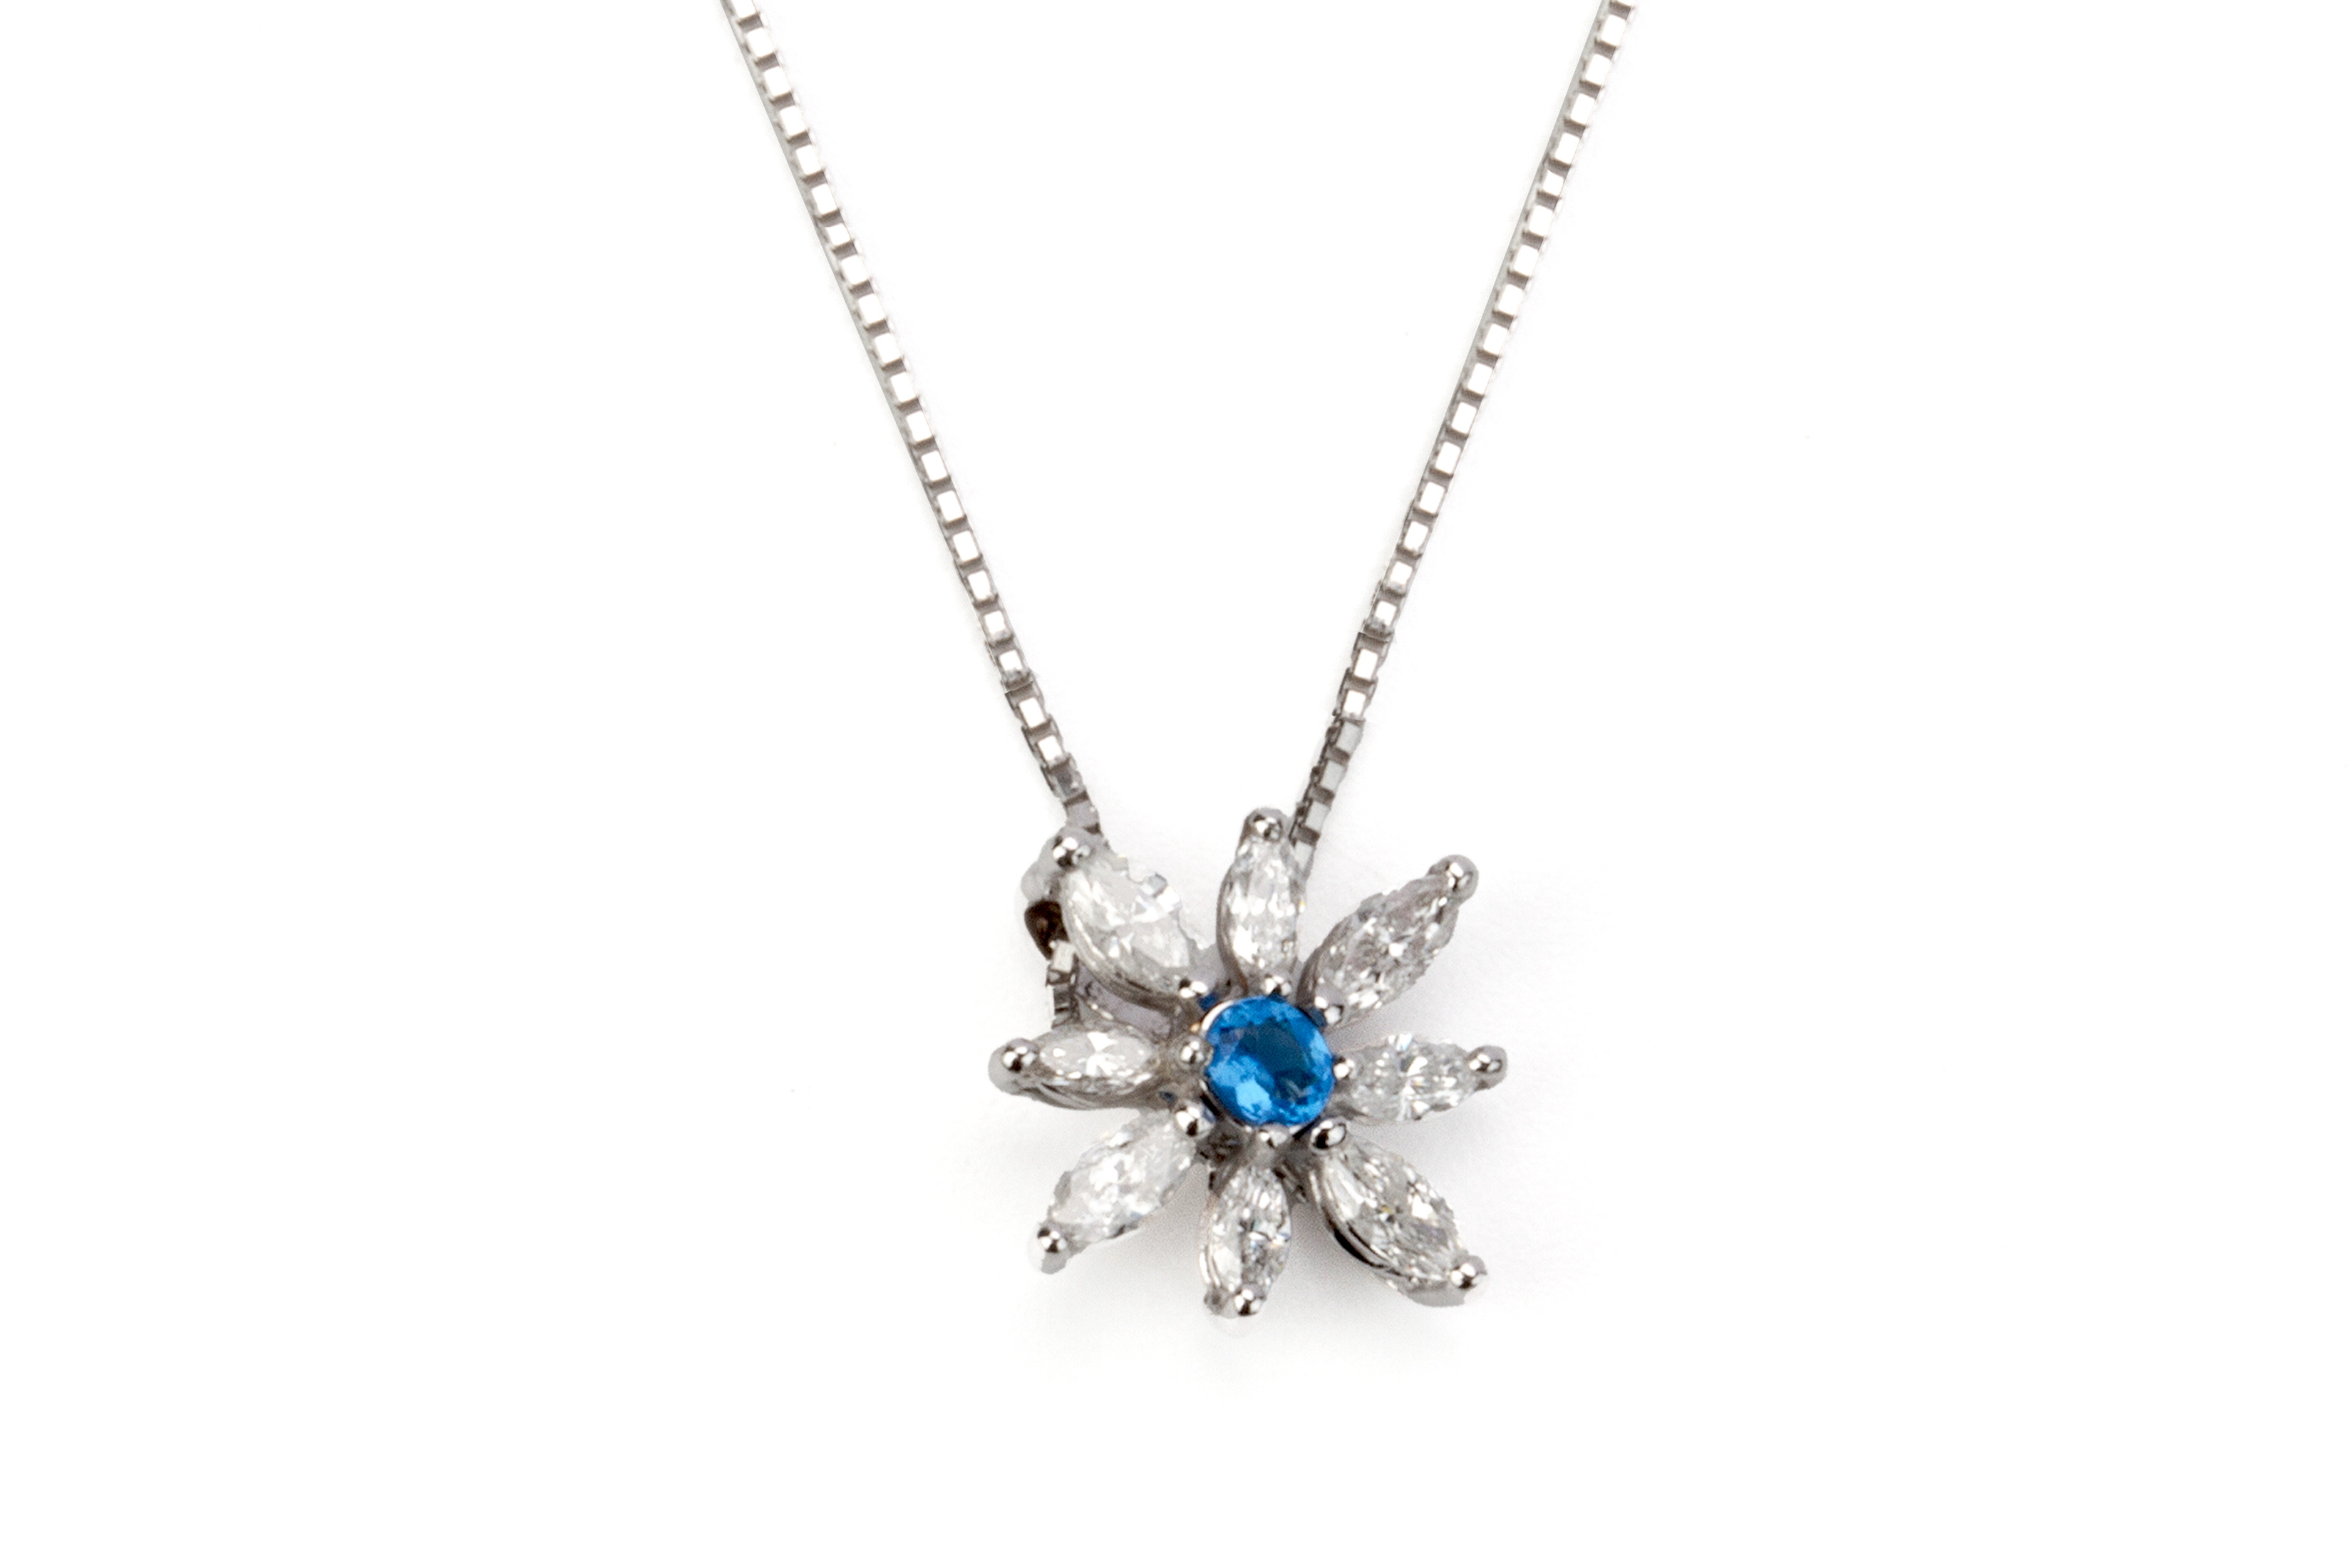 A HAUYNE AND DIAMOND PENDANT WITH ADJUSTABLE CHAIN